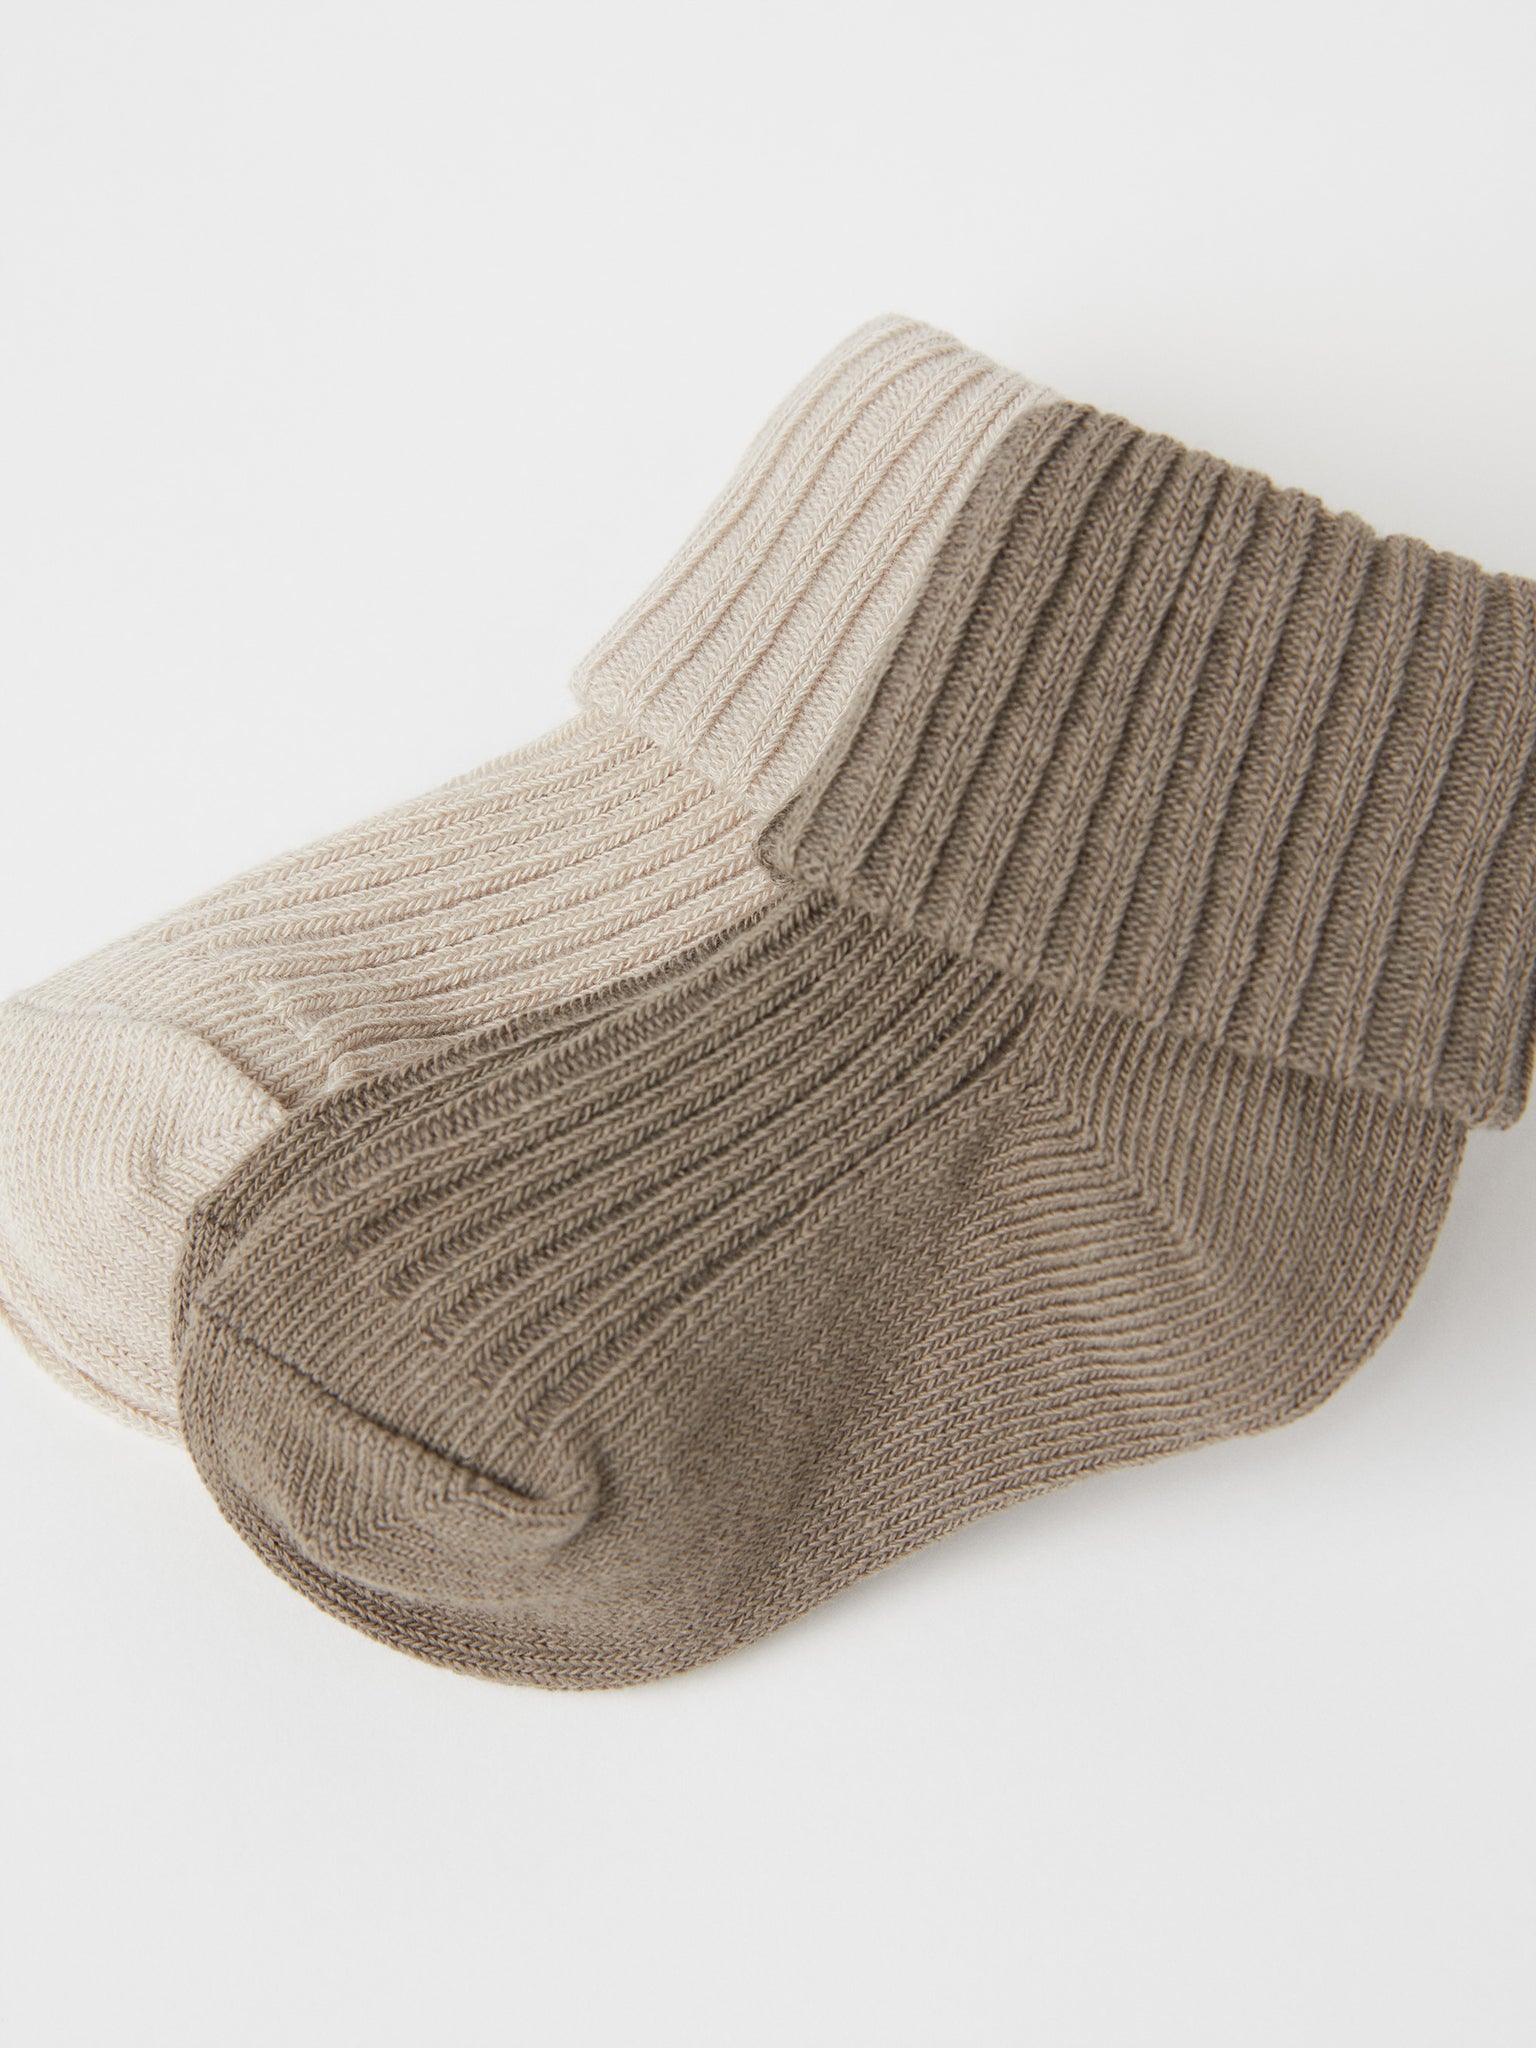 Organic Cotton Beige Baby Socks from the Polarn O. Pyret baby collection. Nordic baby clothes made from sustainable sources.